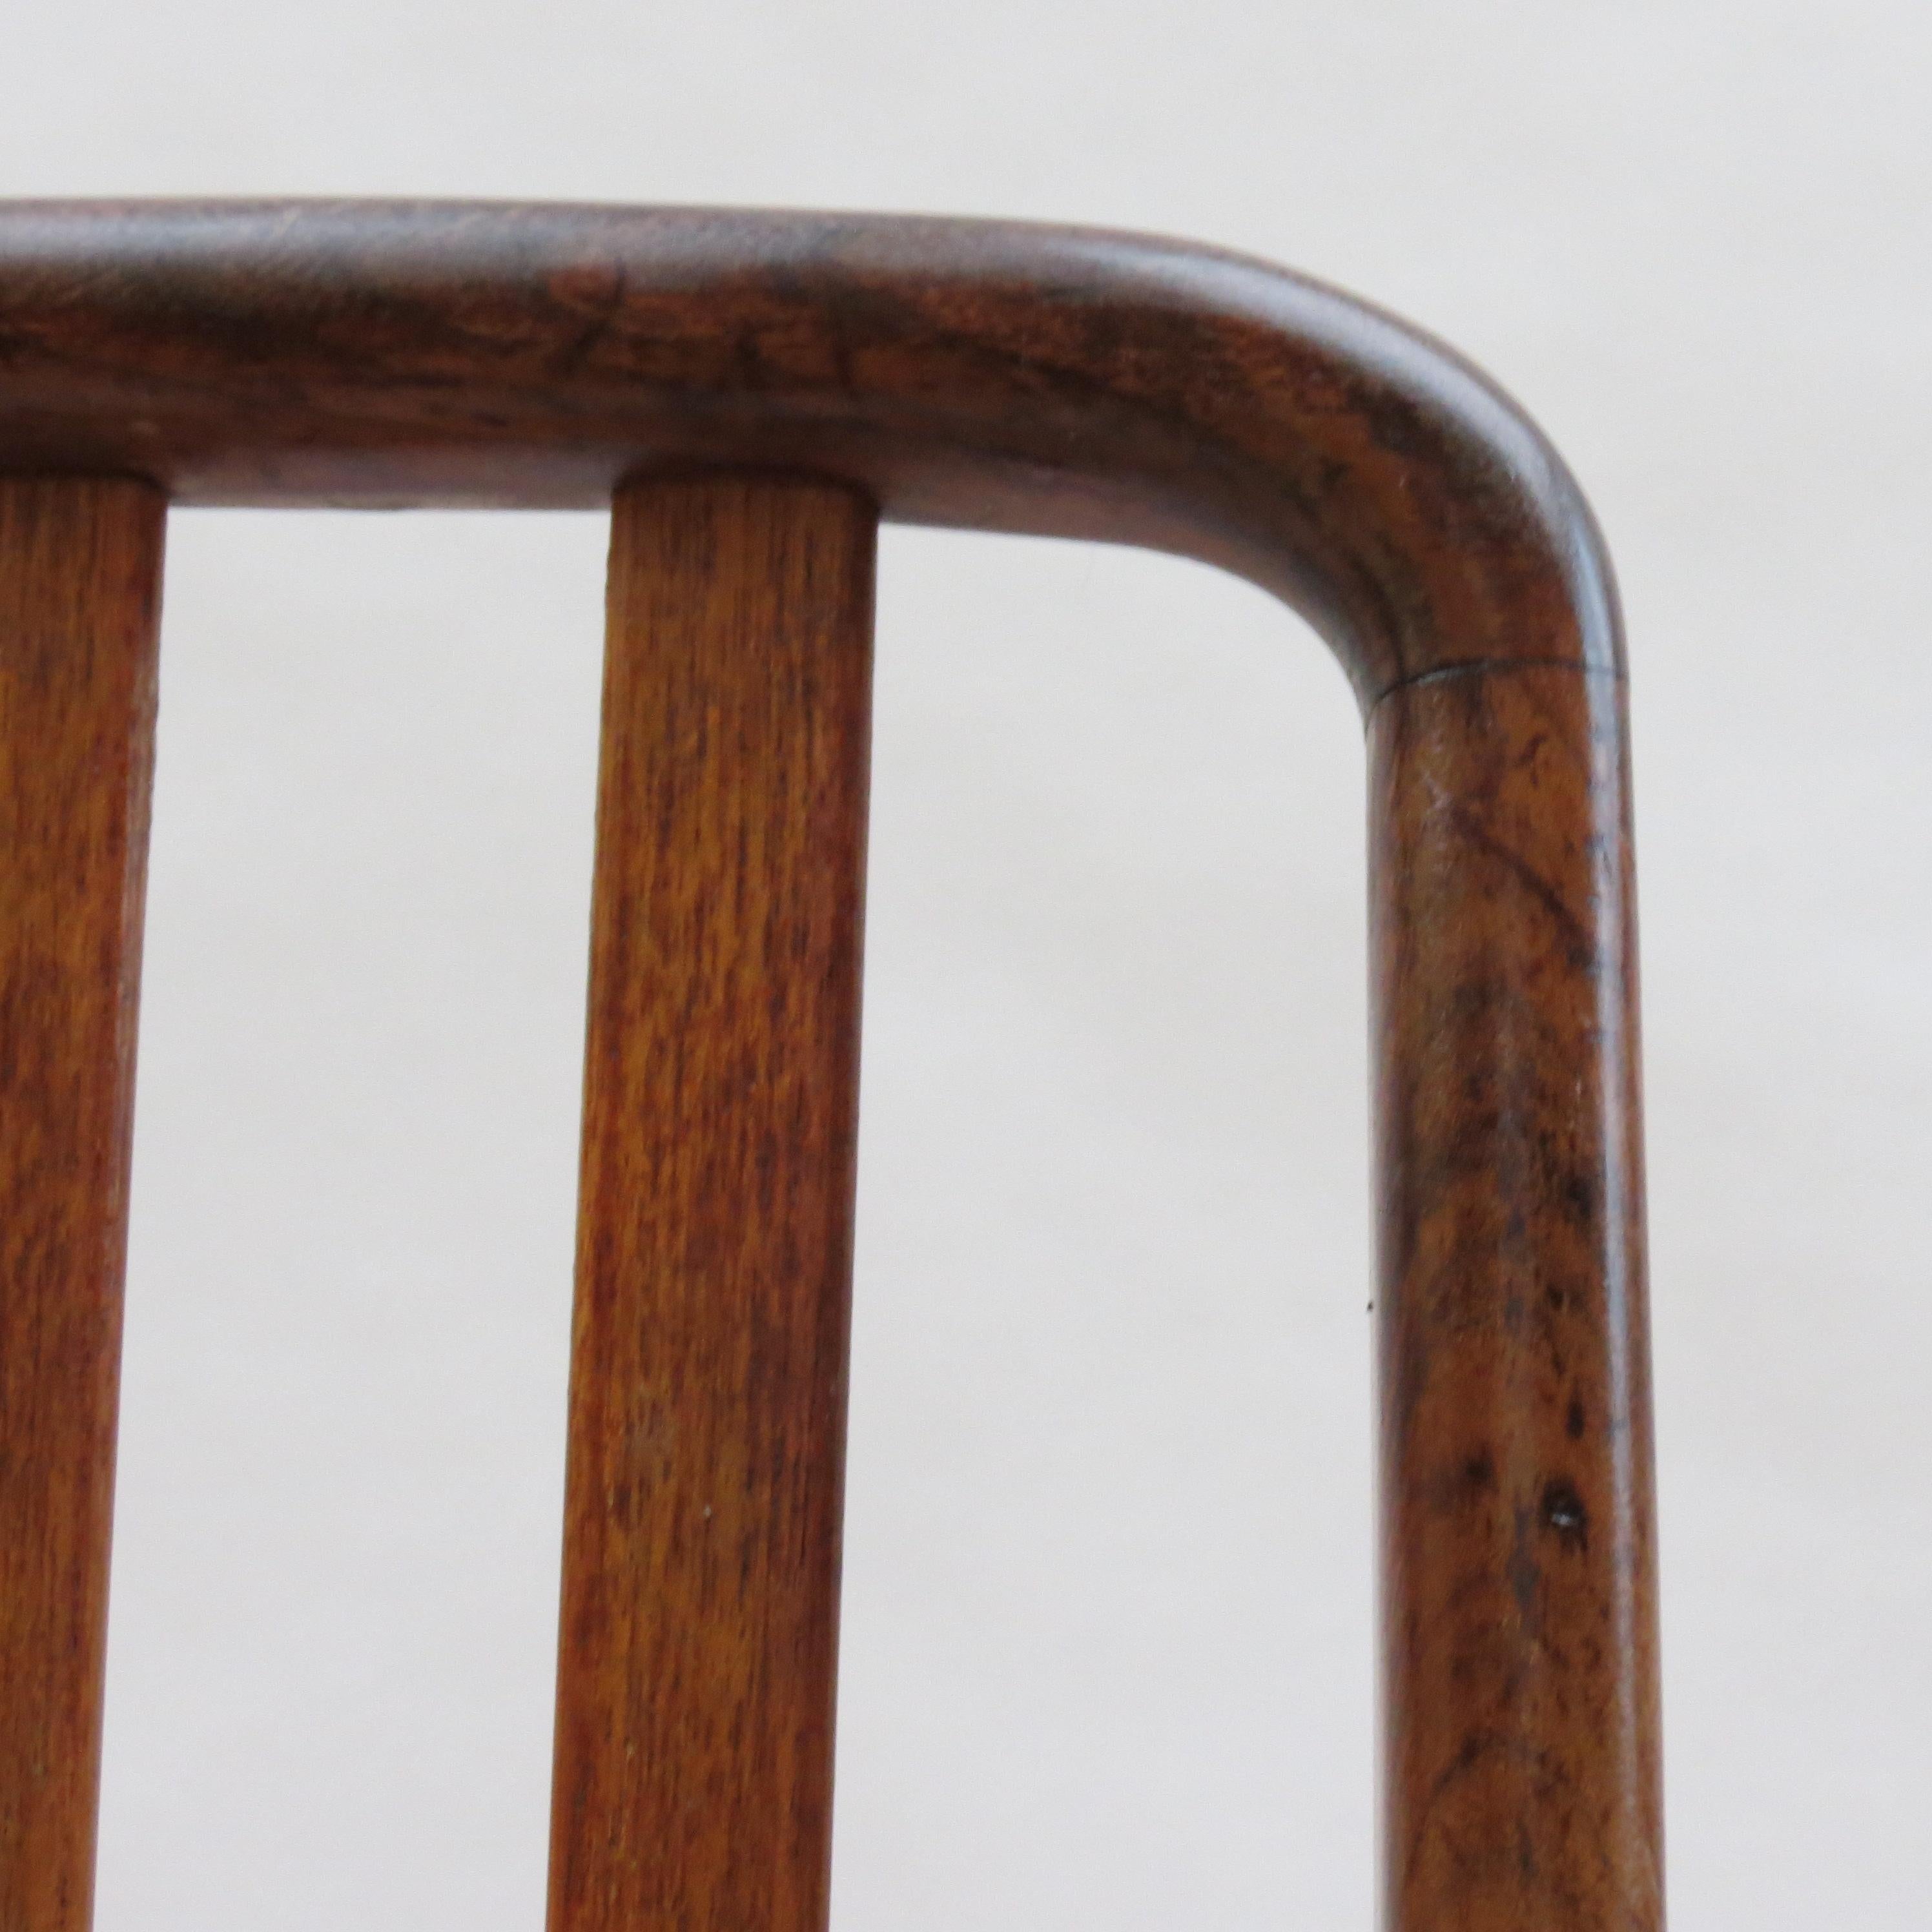 20th Century Midcentury Danish Chair by Svend Madsen 1960s Teak with Leather Seat